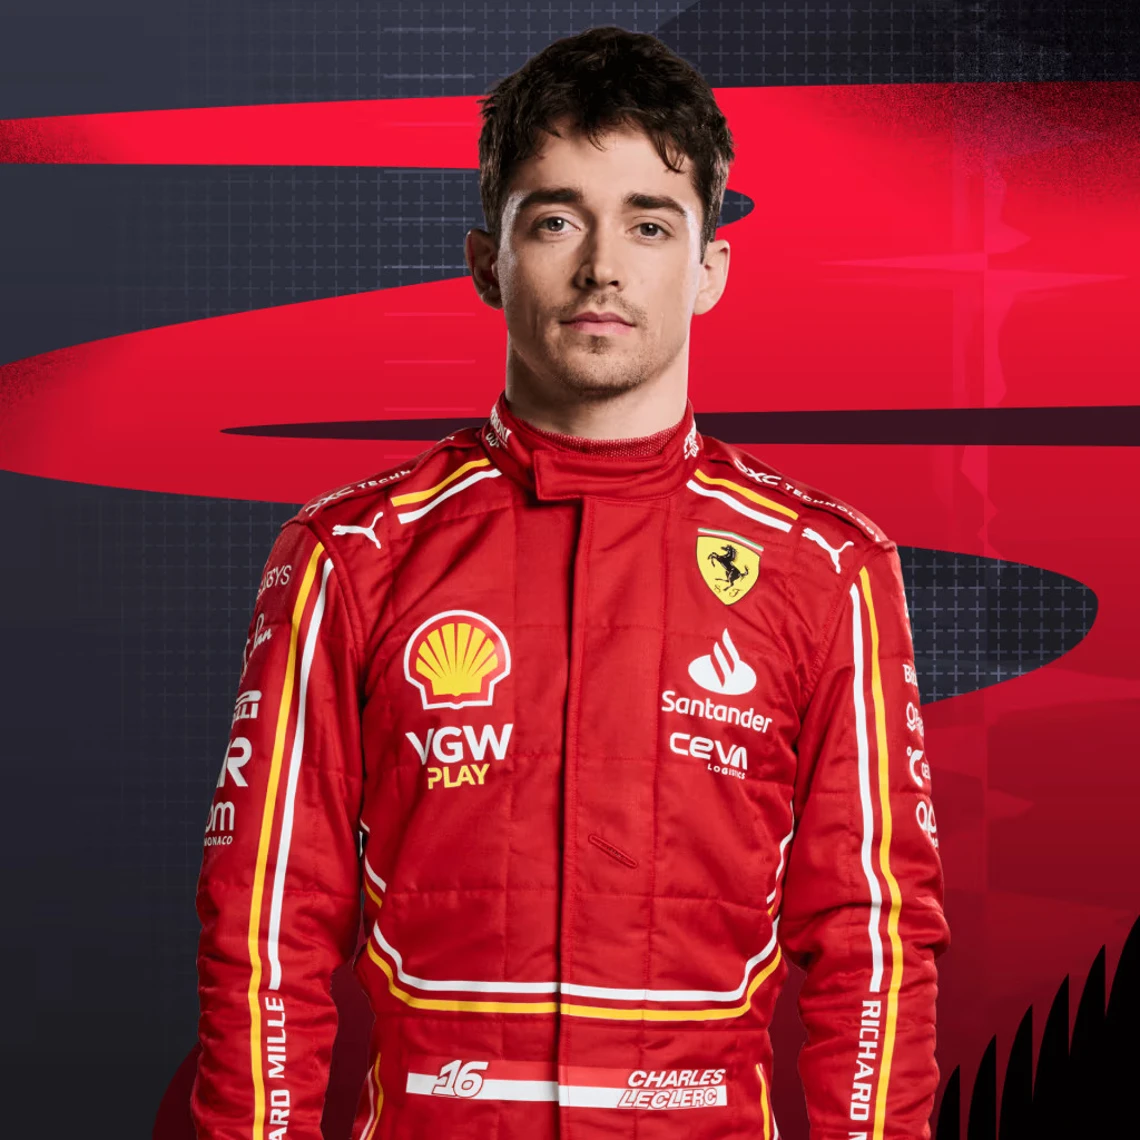 Leclerc shines on bright day in the sun for Ferrari at Imola